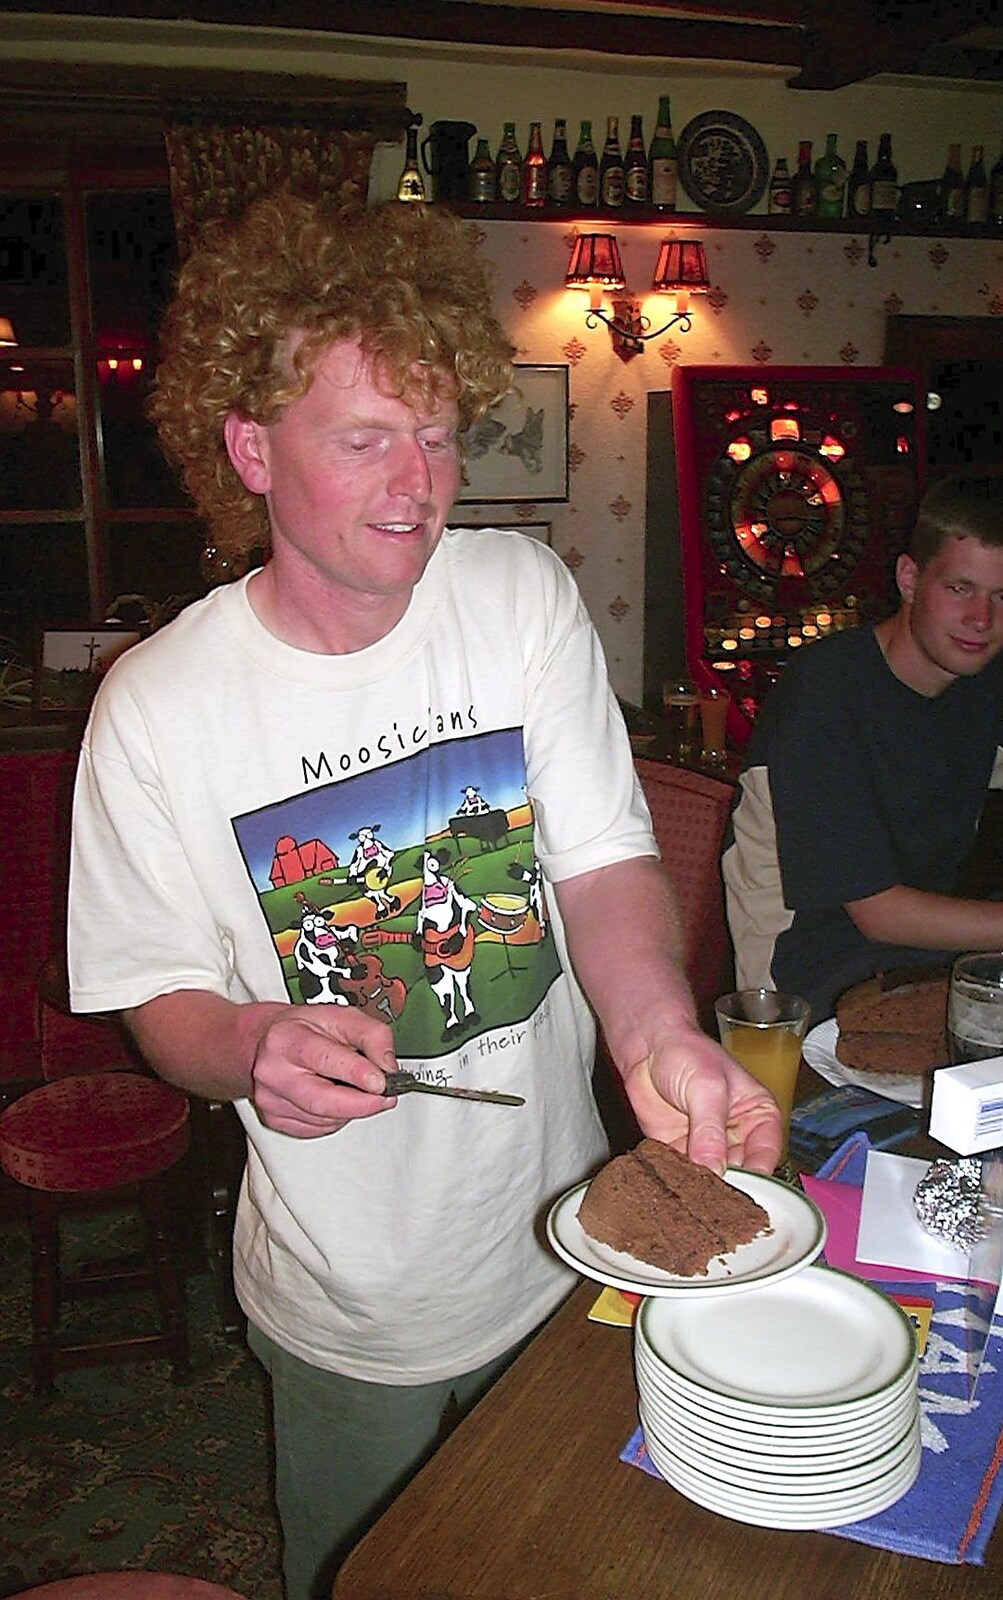 Wavy cuts the cake from Wavy's Birthday at the Swan Inn, Brome, Suffolk - 24th May 2004